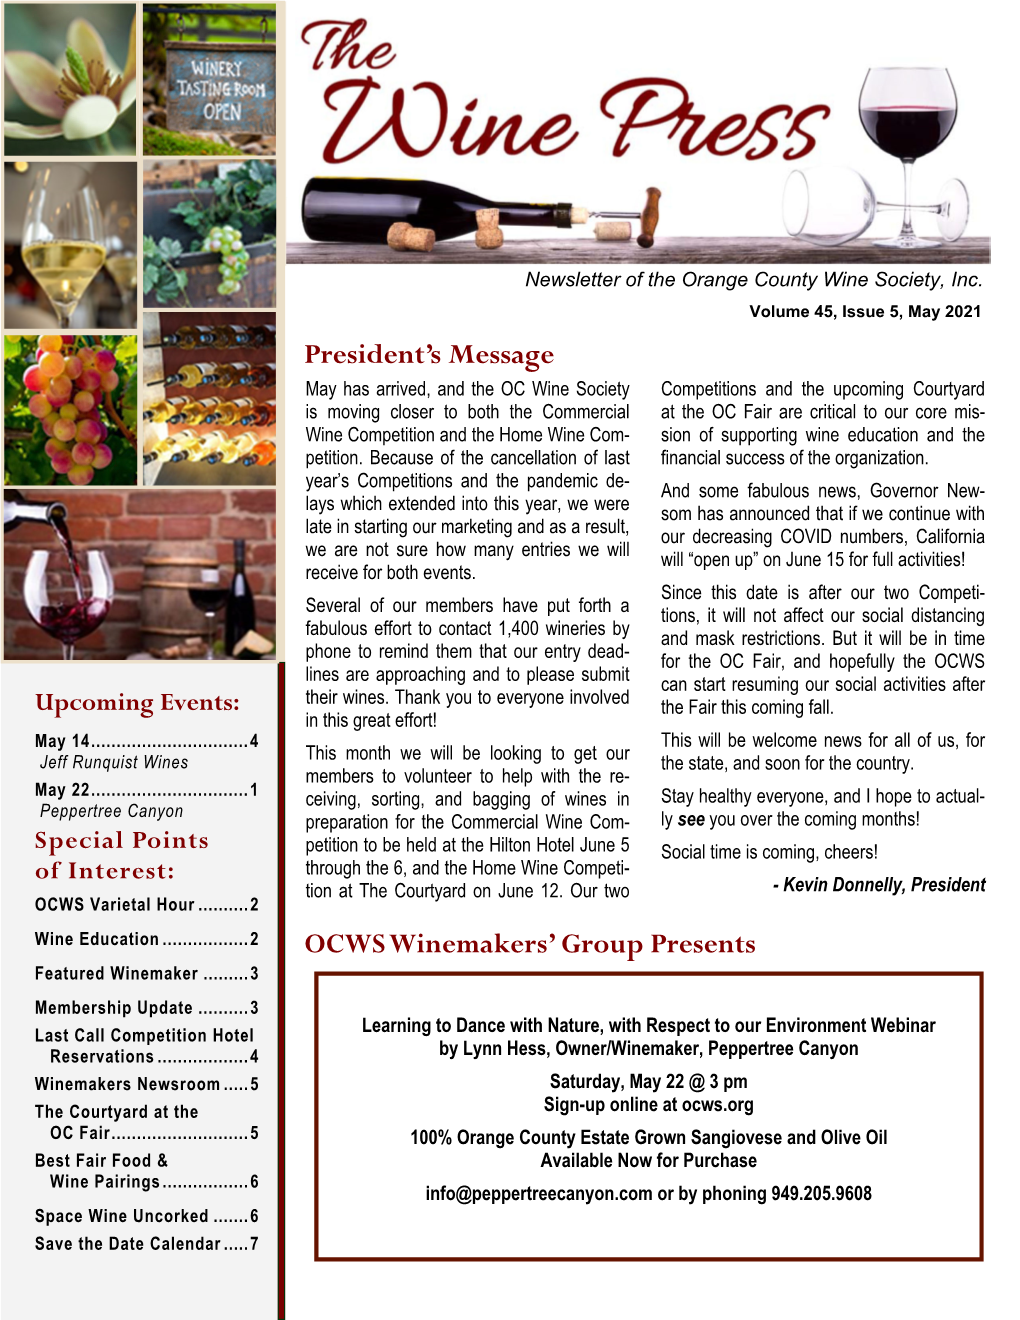 President's Message OCWS Winemakers' Group Presents